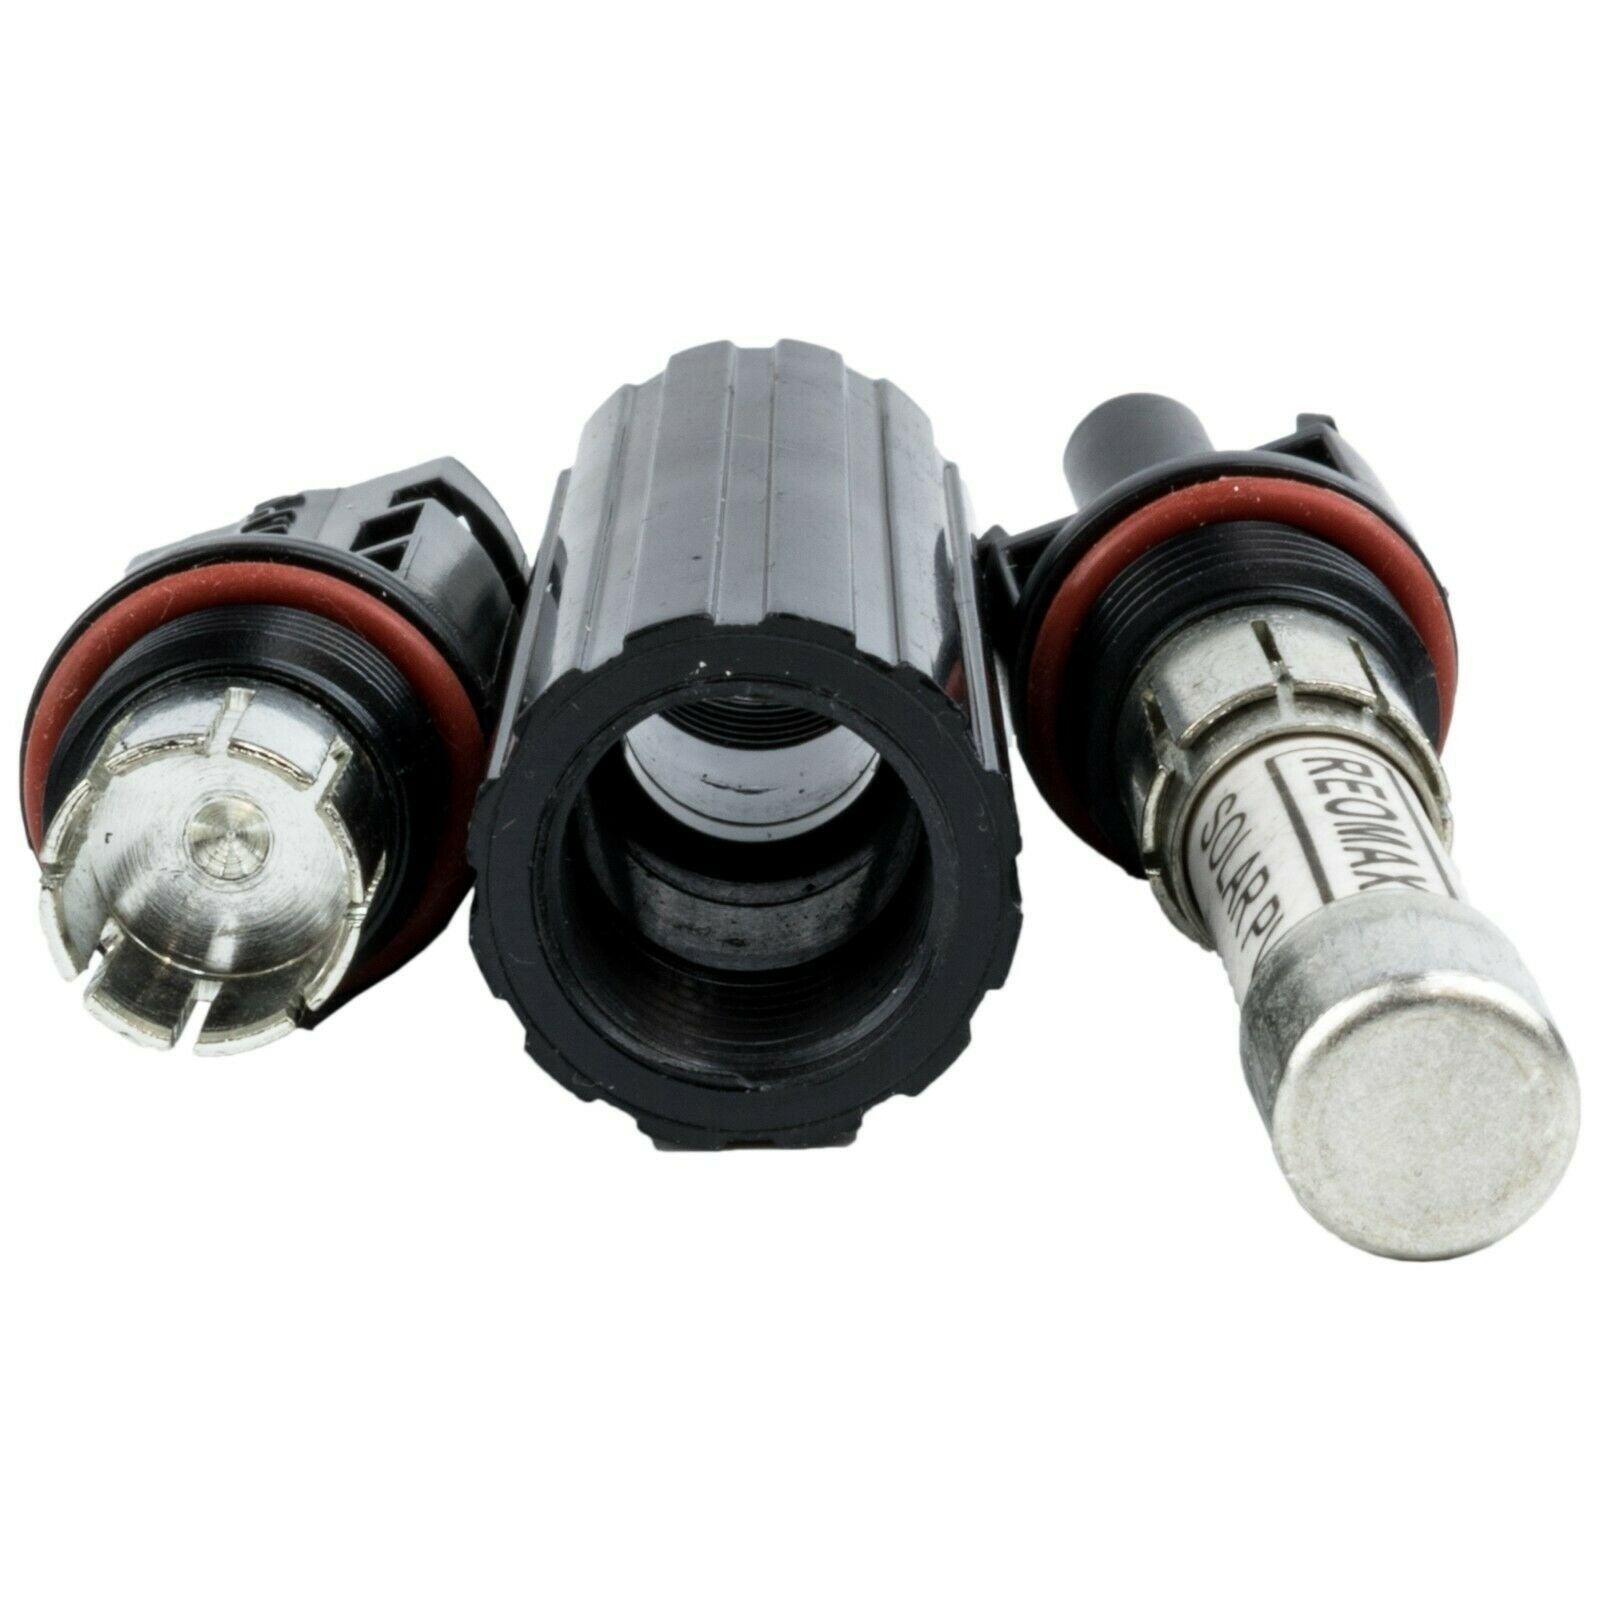 MC4 Connectors With Fuses 12A. Pair Of Male & Female - VoltaconSolar